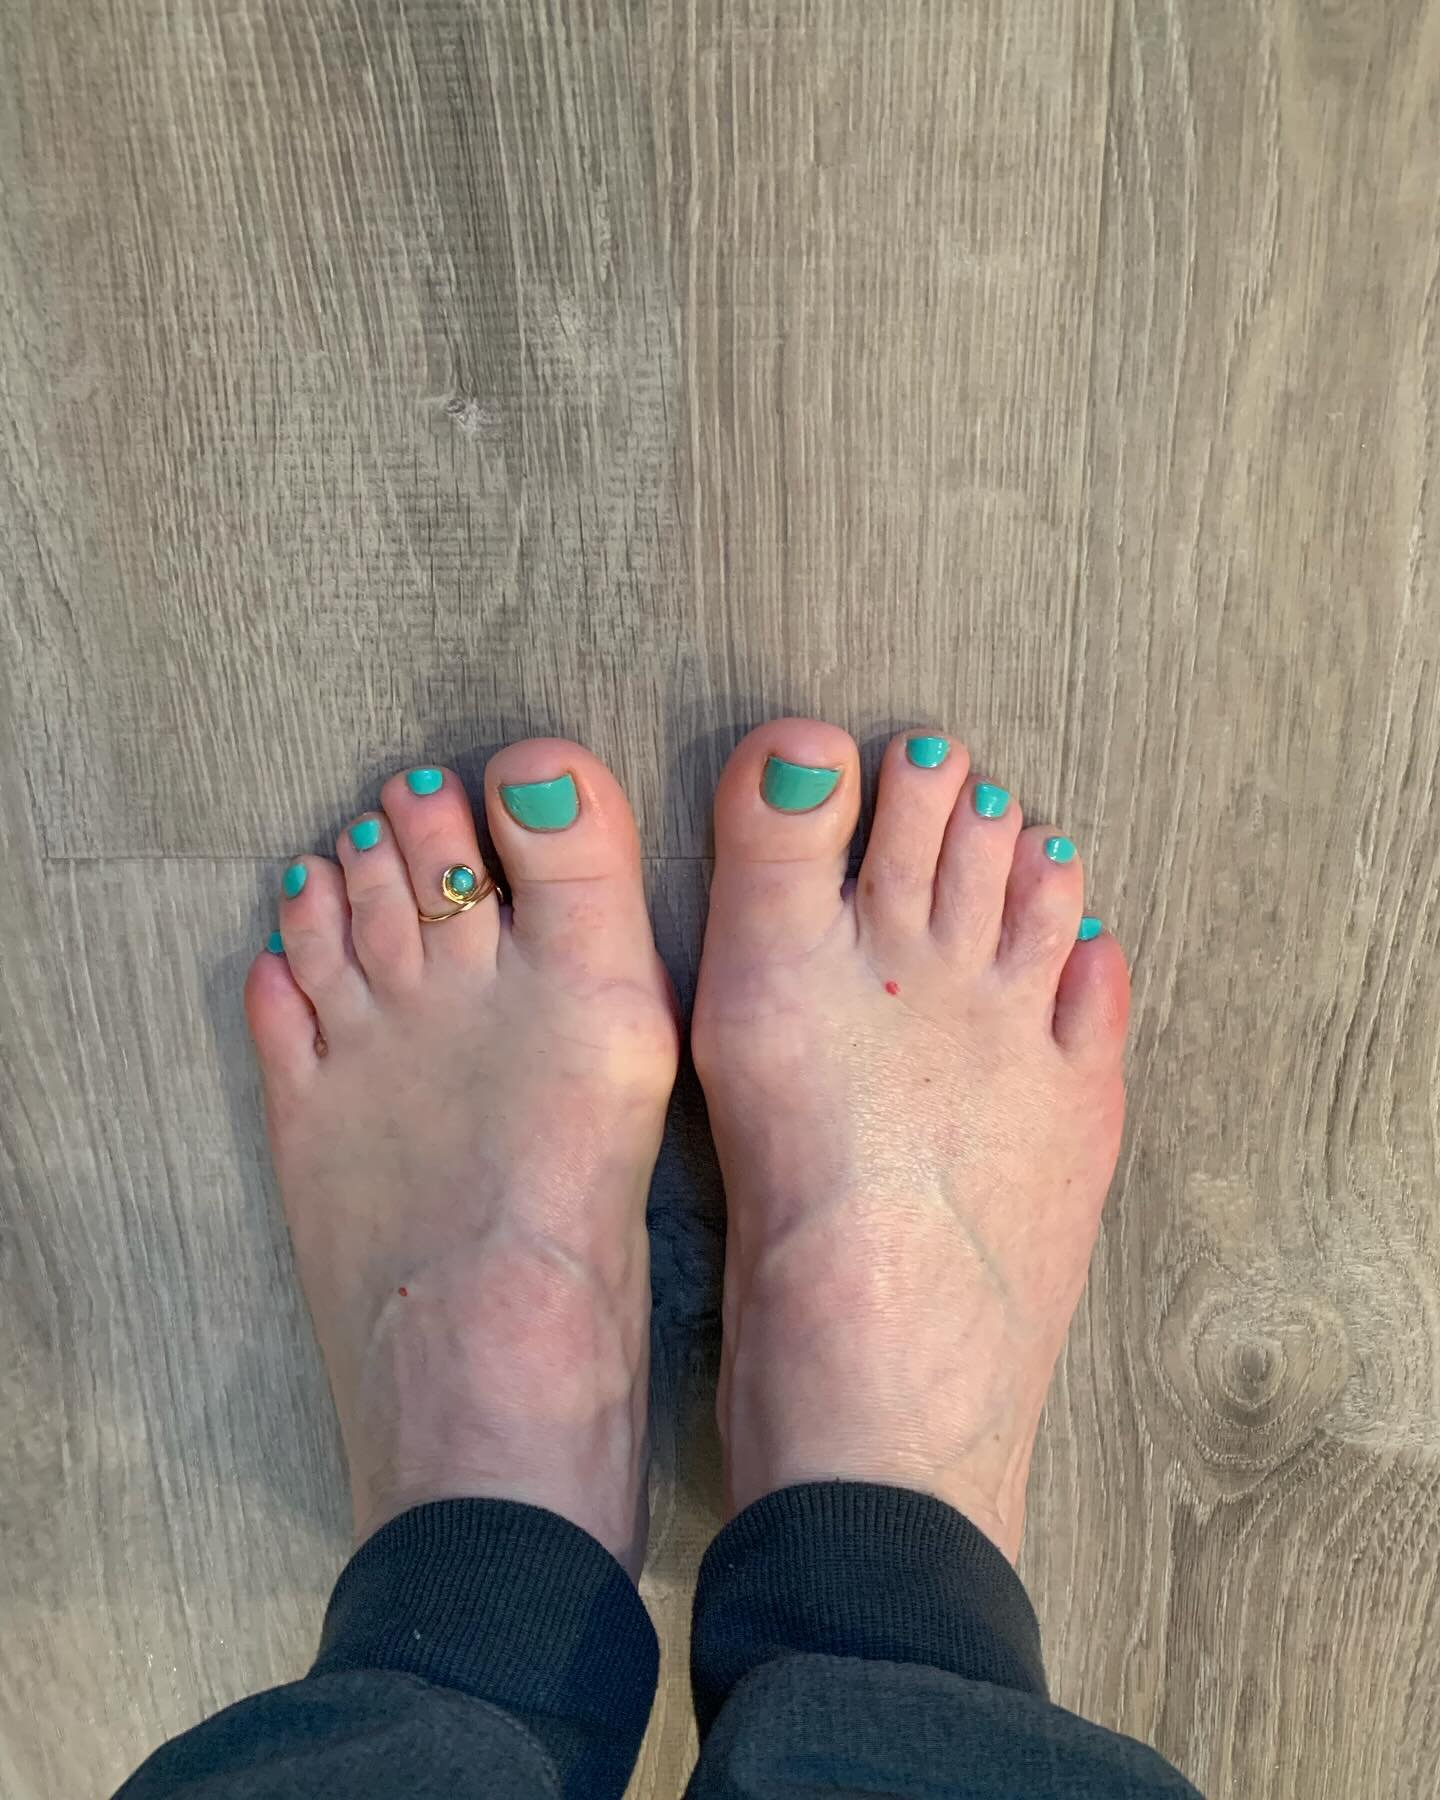 Pausing for a moment to celebrate the JOY of newly painted toenails, and the tender care that went into making my feet soft as a baby&rsquo;s derri&egrave;re! 

Thank you Cedar Creek Pedicures. 

#eastertide #50daysofjoy #gratitude #spring #memories 